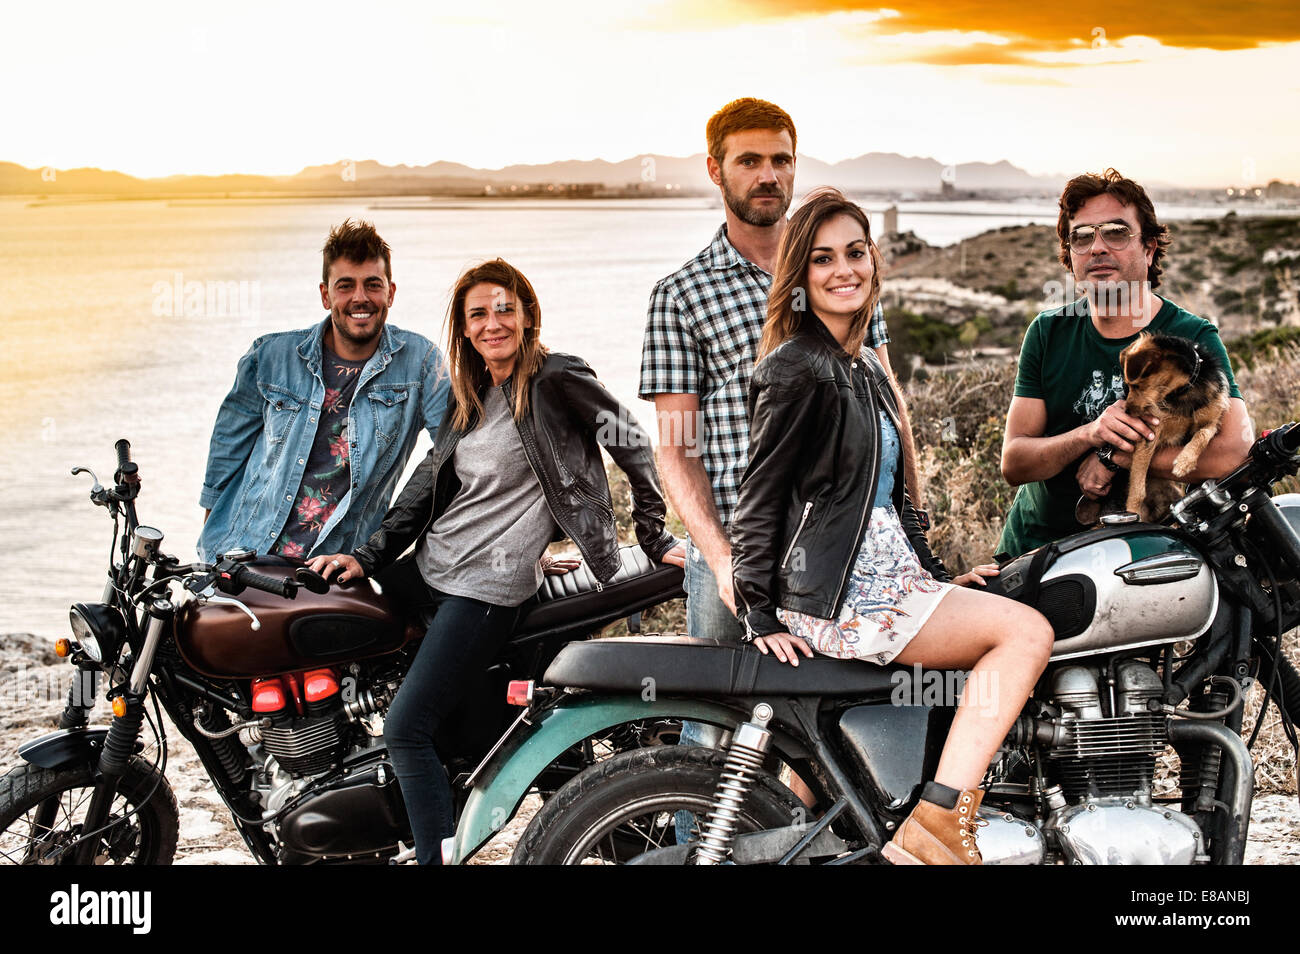 Portrait of five motorcycling friends on coast at sunset, Cagliari, Sardinia, Italy Stock Photo